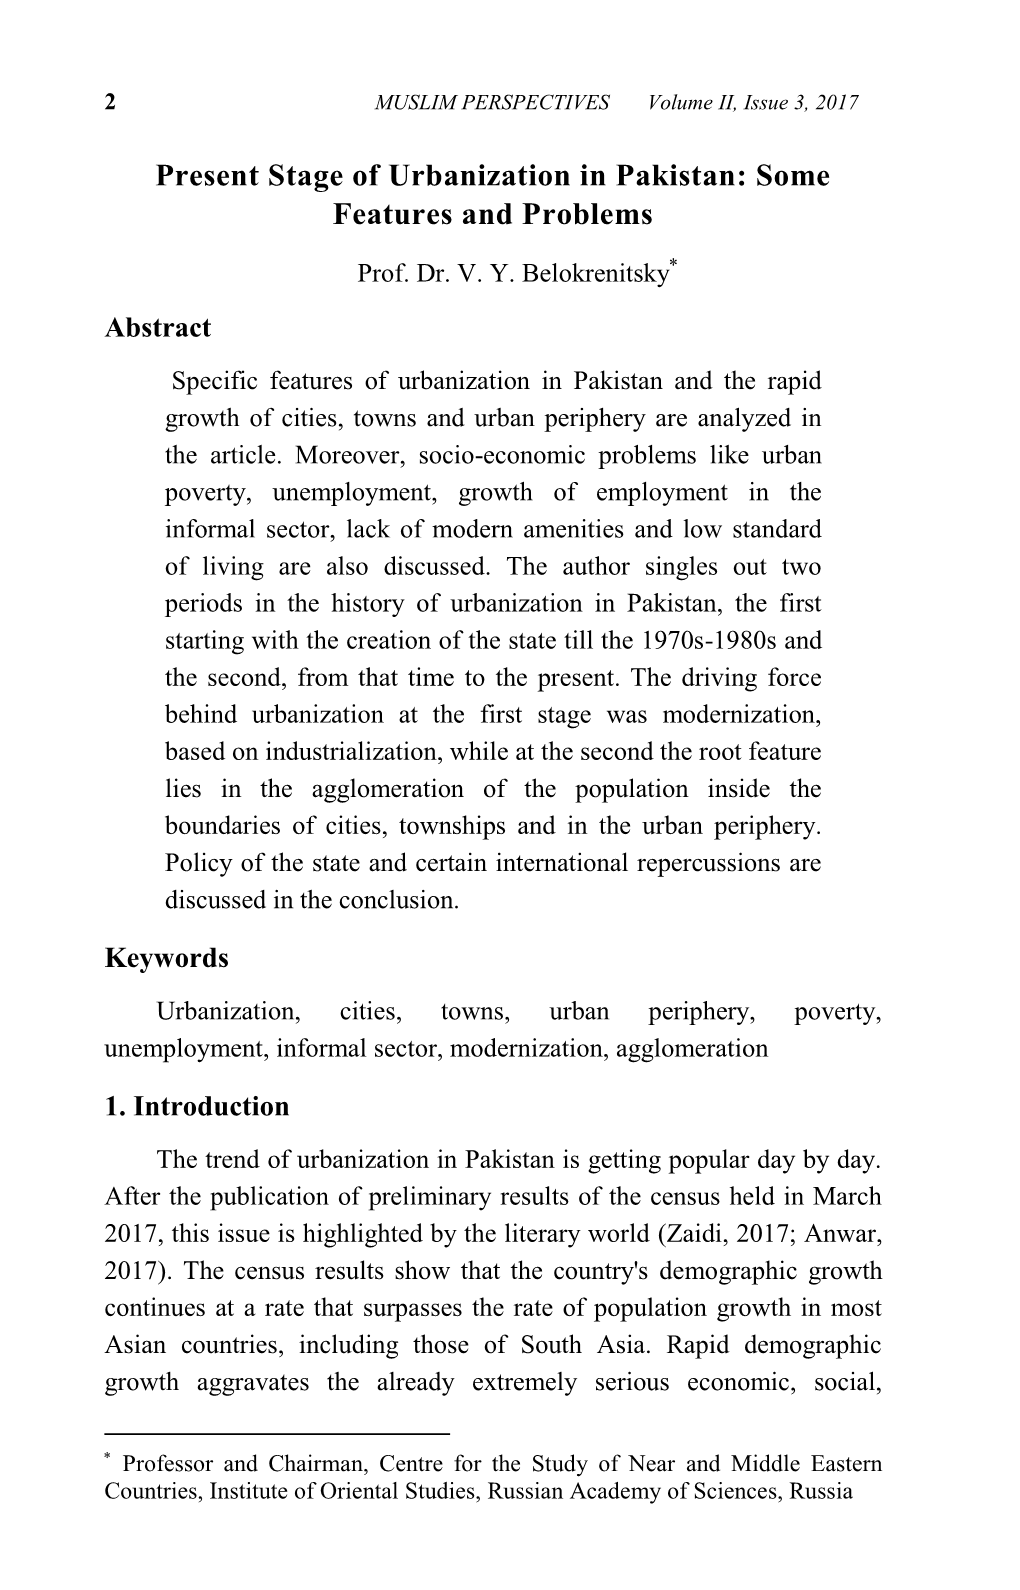 Present Stage of Urbanization in Pakistan: Some Features and Problems